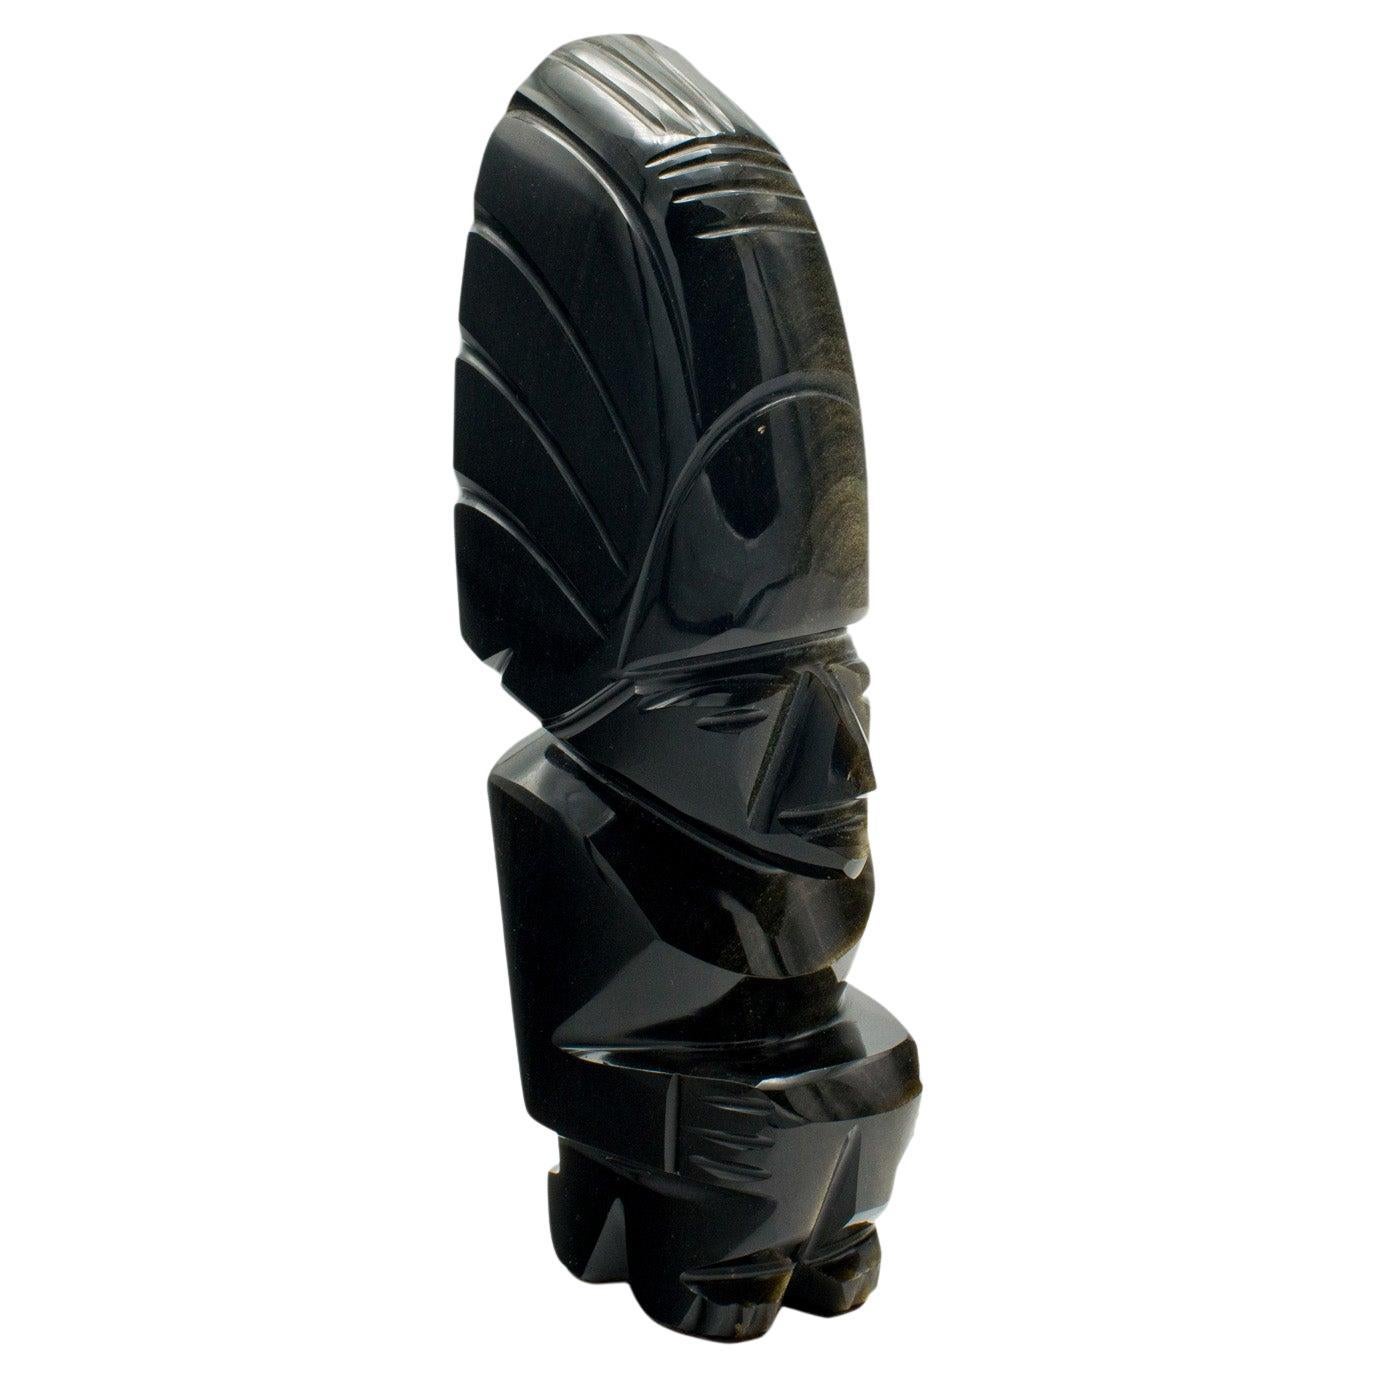 Small Vintage Aztec Idol Figure, South American, Obsidian, Mayan Sculpture, 1950